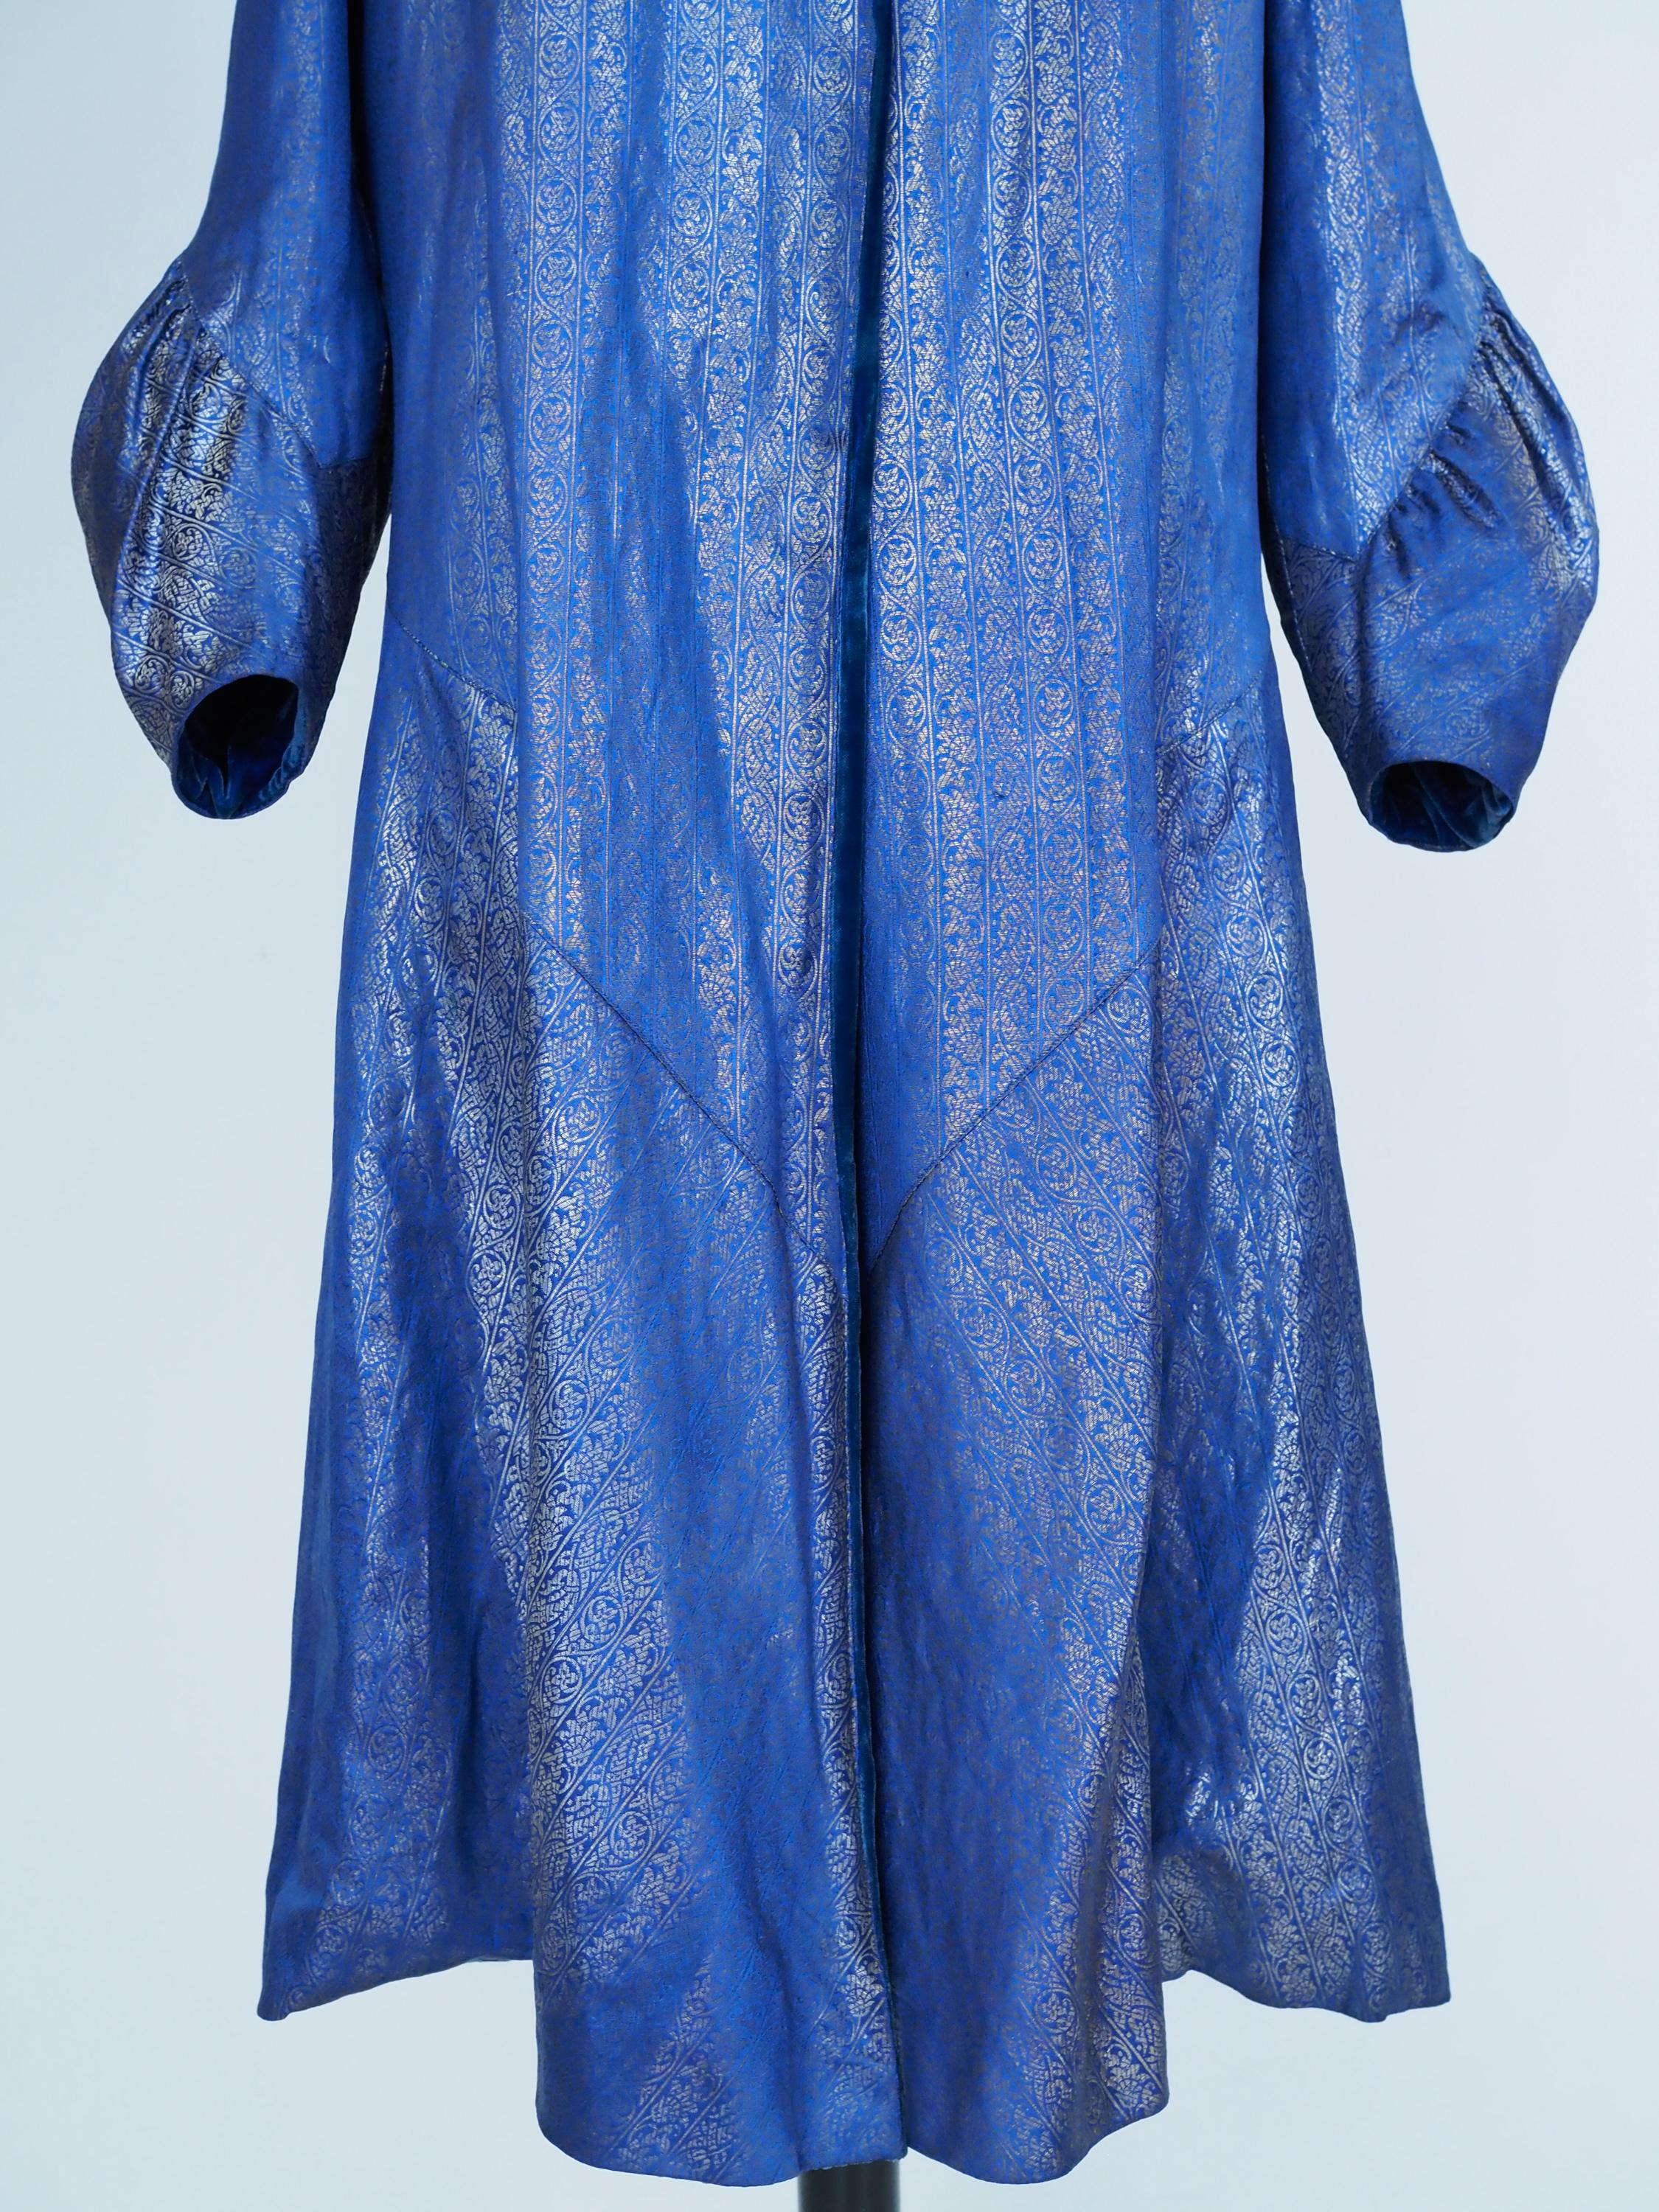 Evening Couture coat in silver lamé by Germaine Lecomte N°03871 Paris Circa 1930 For Sale 1